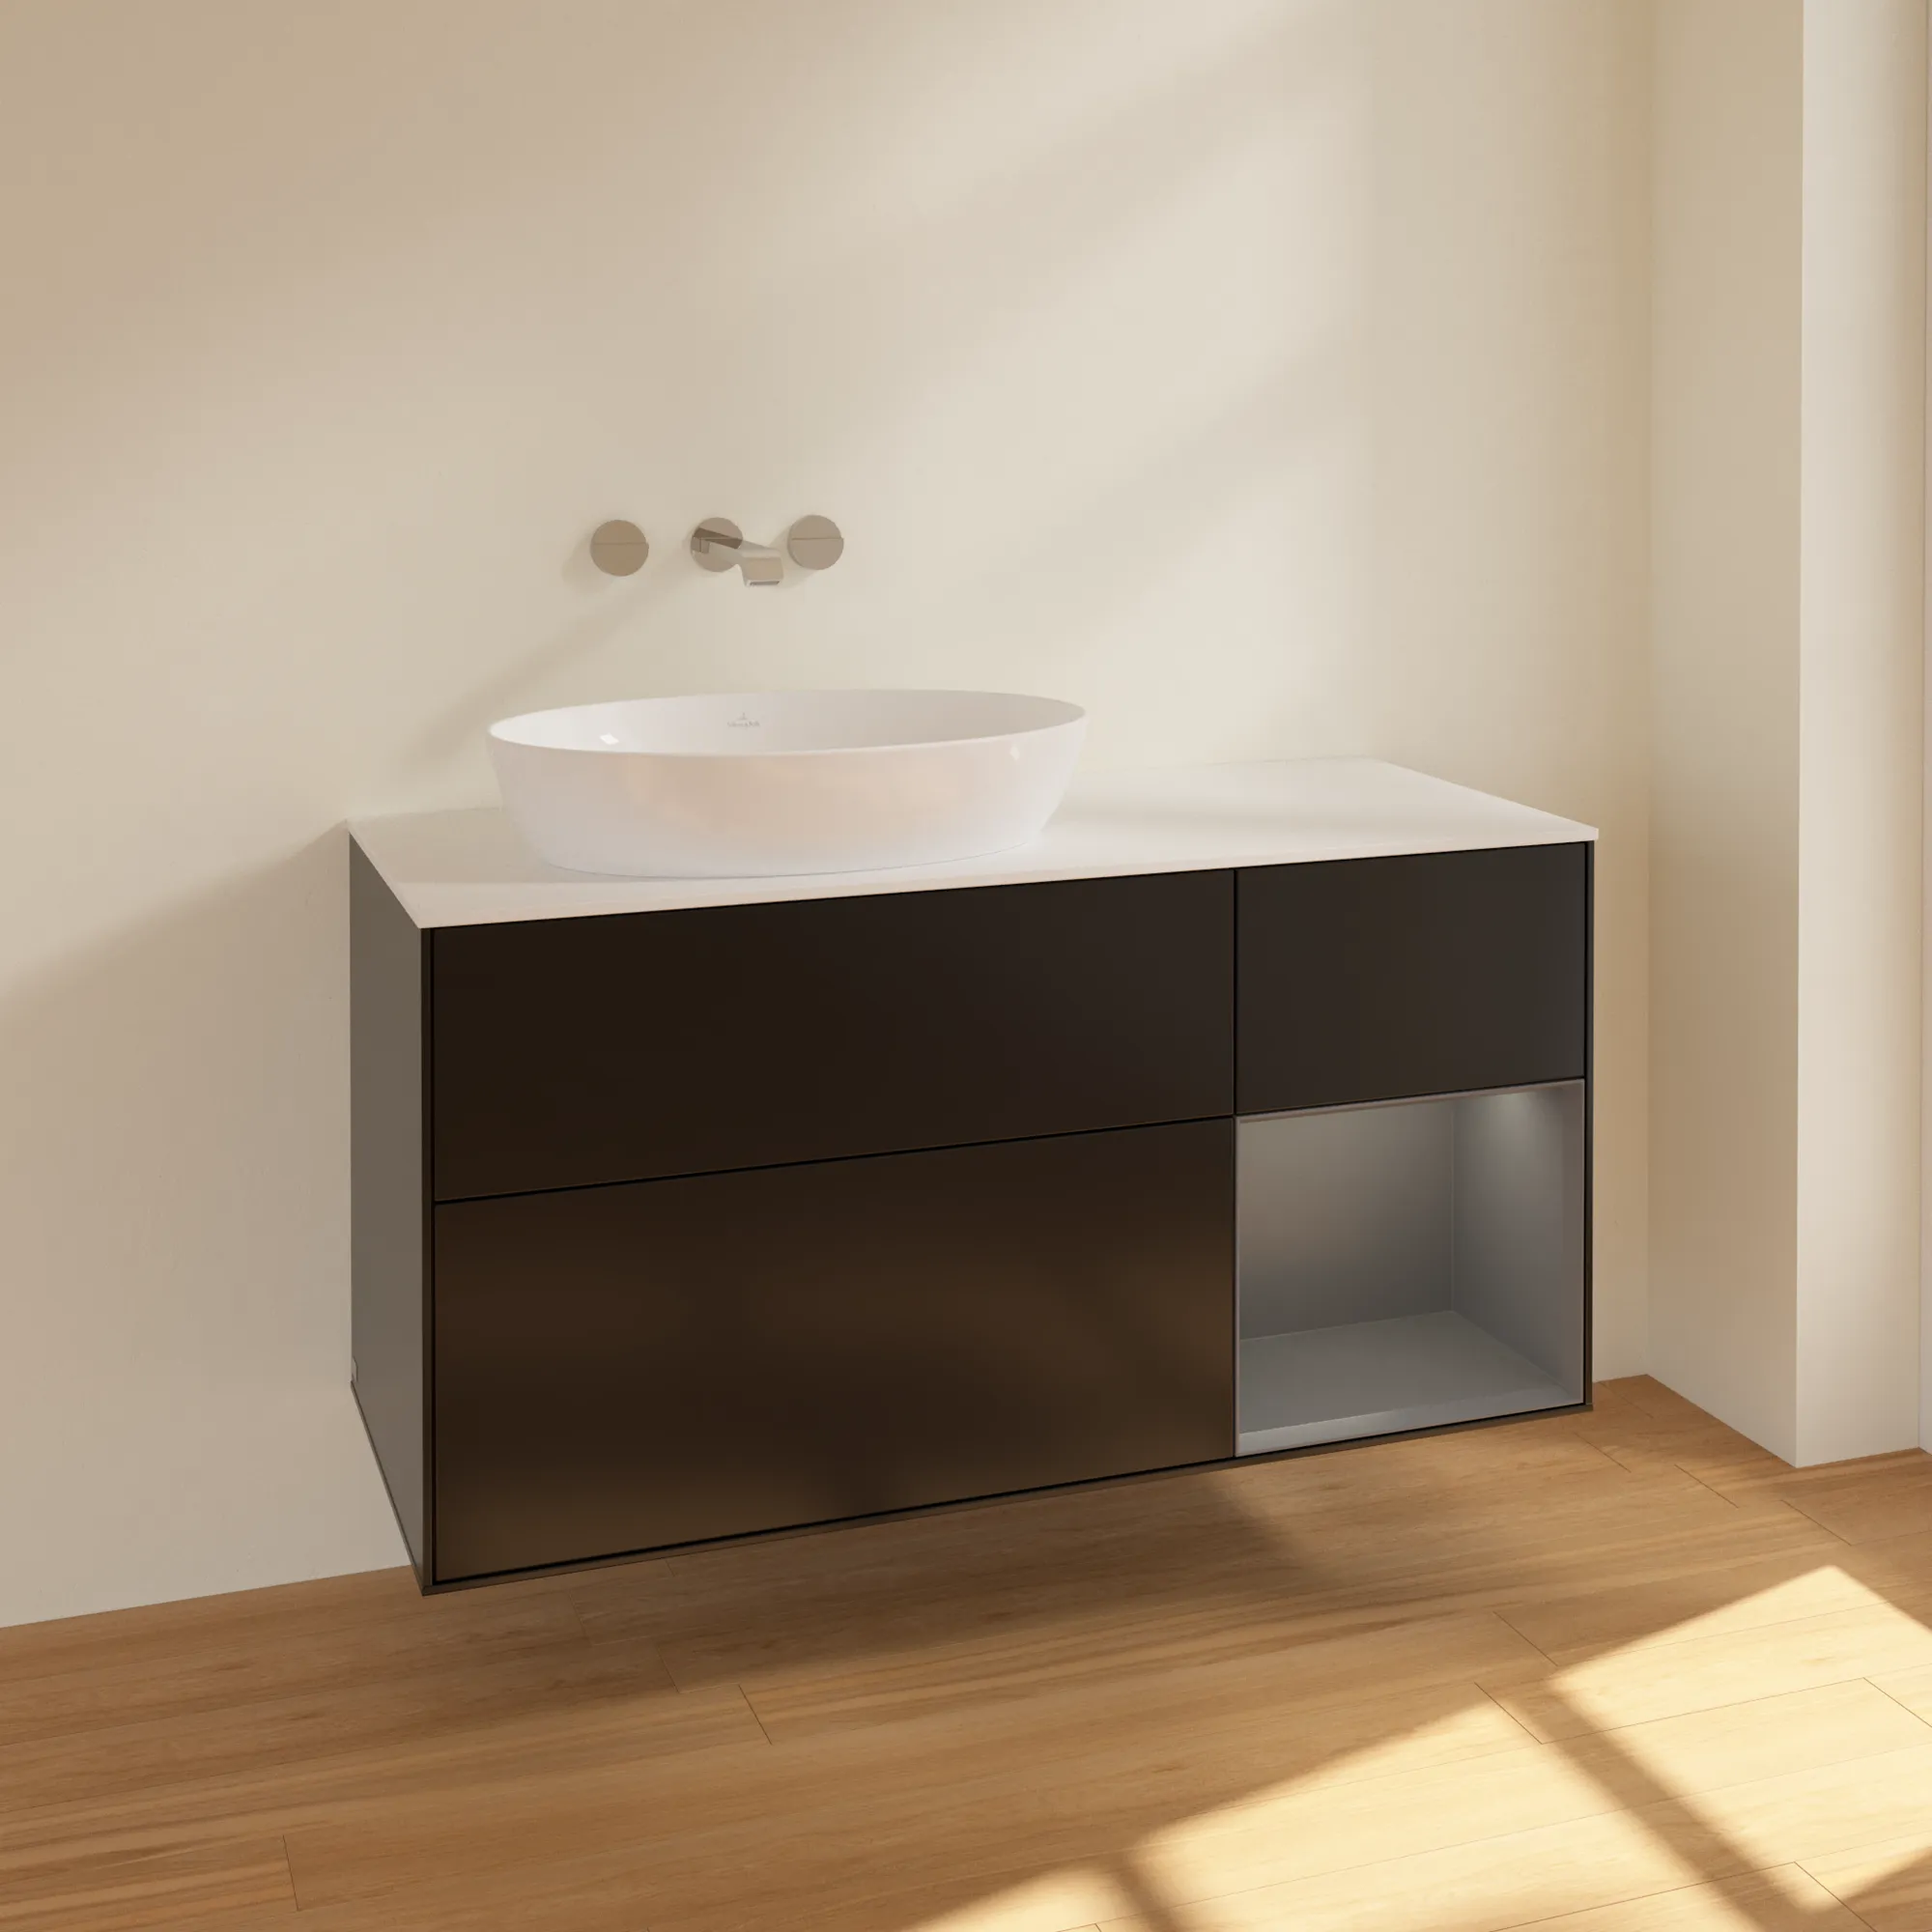 Obrázek VILLEROY BOCH Finion Vanity unit, with lighting, 3 pull-out compartments, 1200 x 603 x 501 mm, Black Matt Lacquer / Anthracite Matt Lacquer / Glass White Matt #FA51GKPD